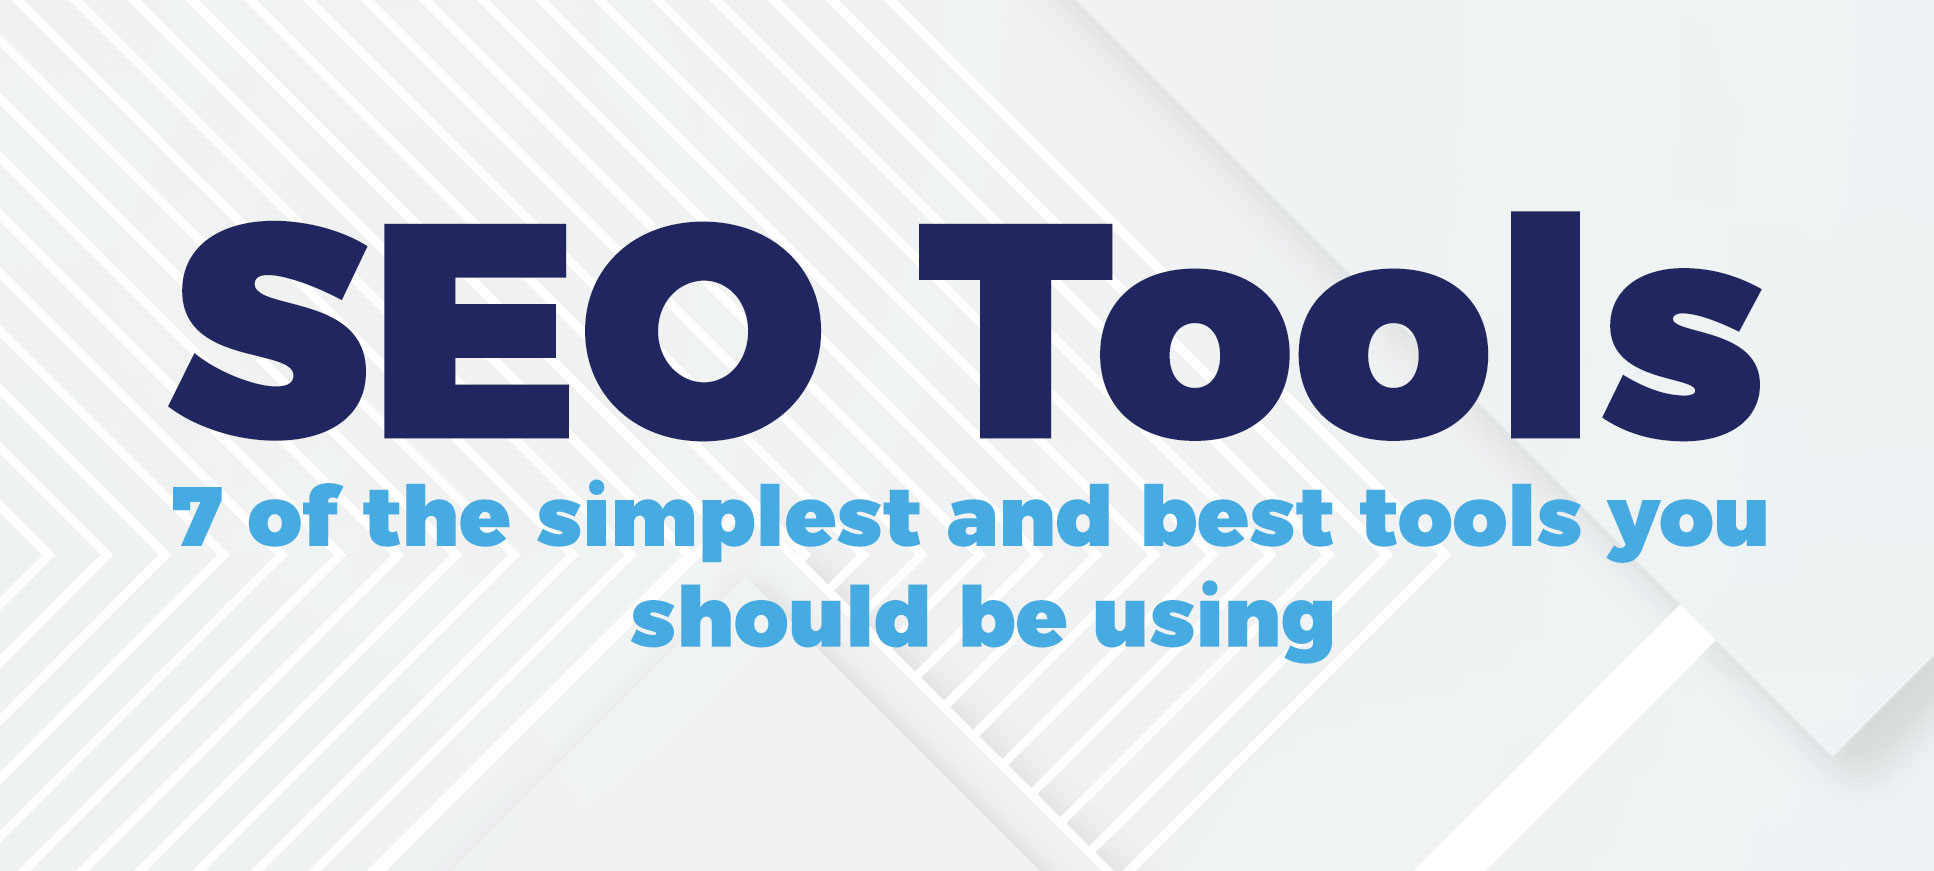 seo tools 7 of the simplest and best tools you should be using